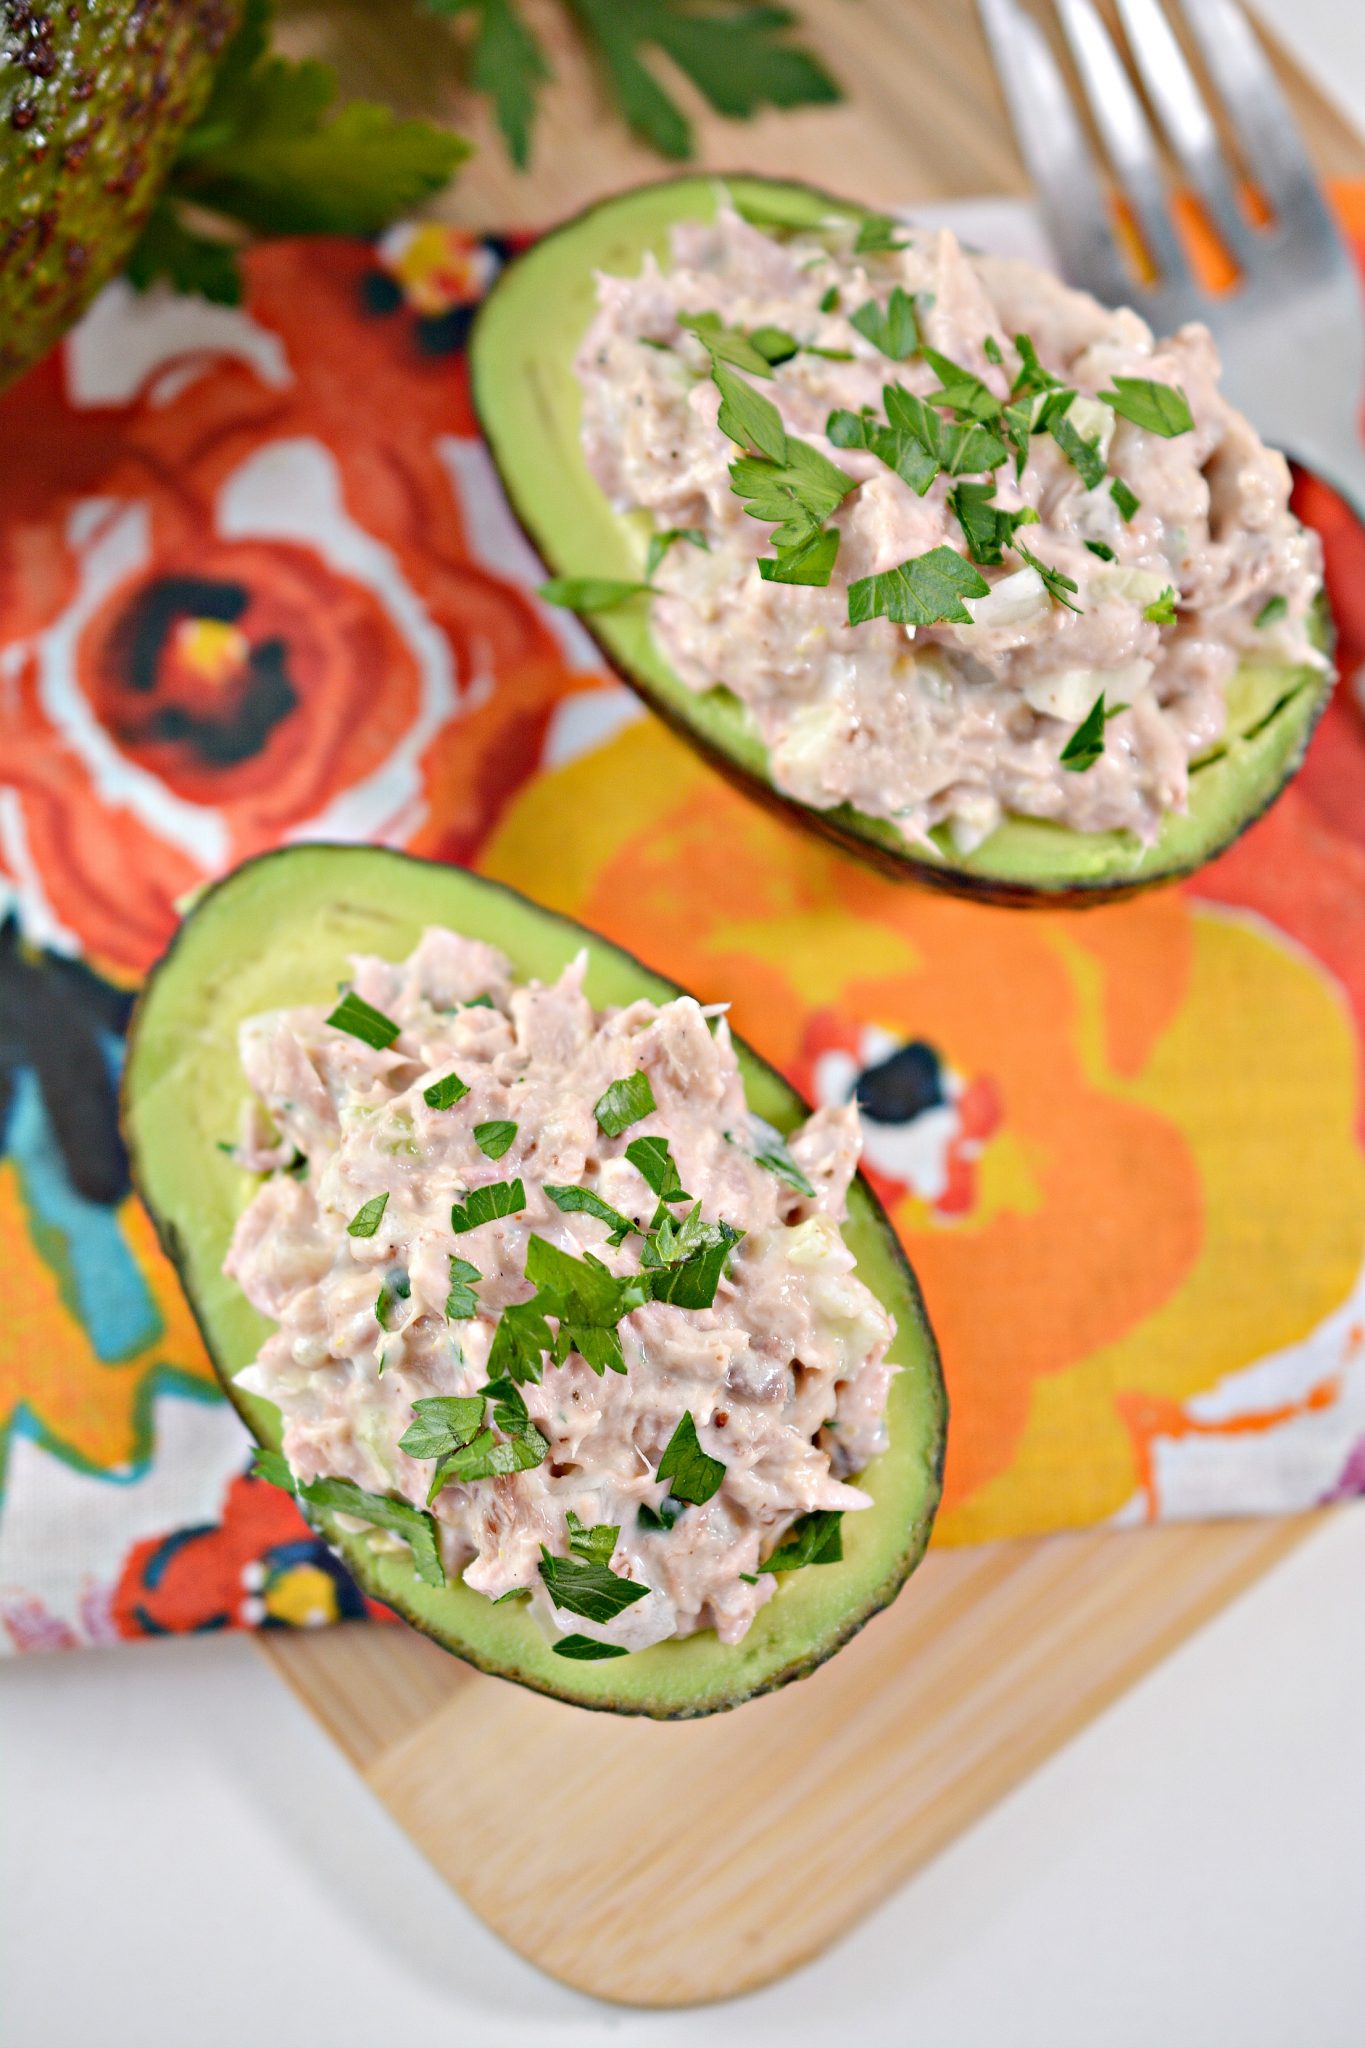 Tuna Salad Stuffed Avocados - From Gate To Plate